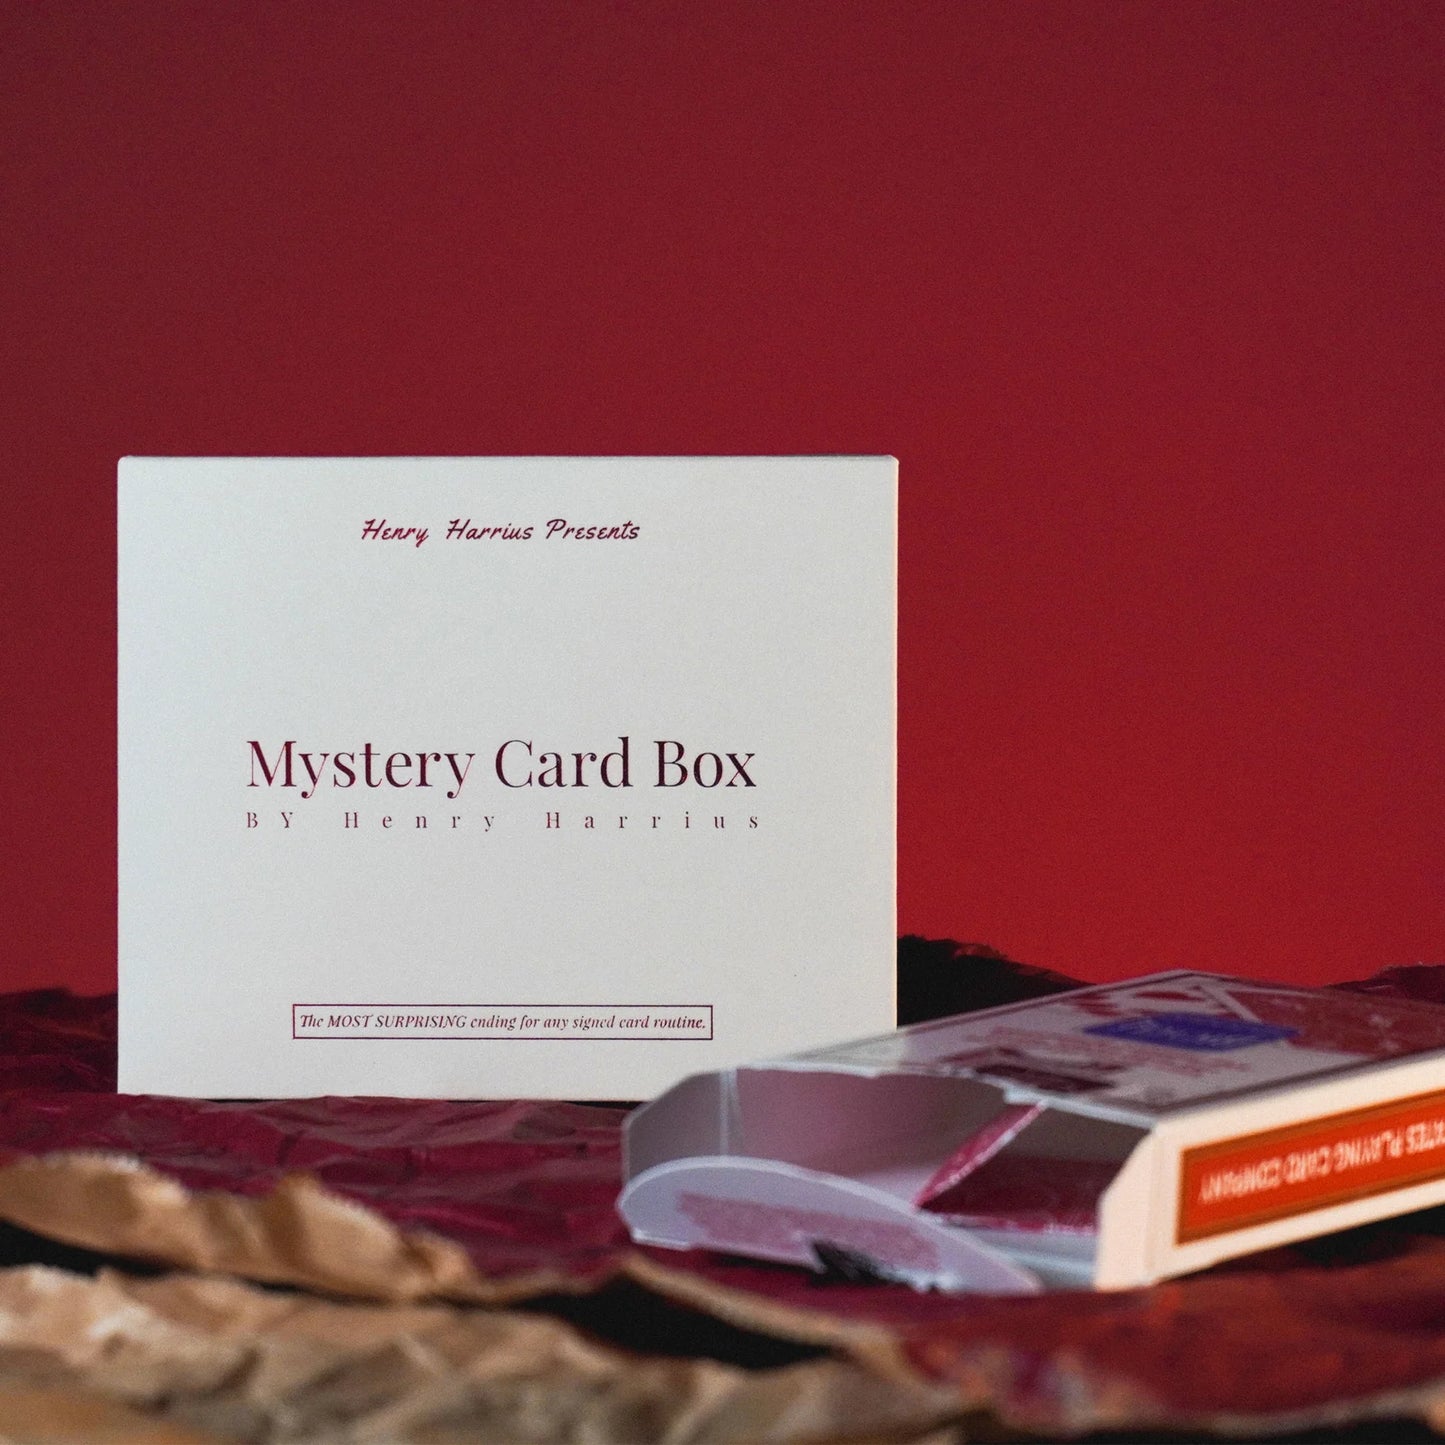 Mystery Card Box by Henry Harrius